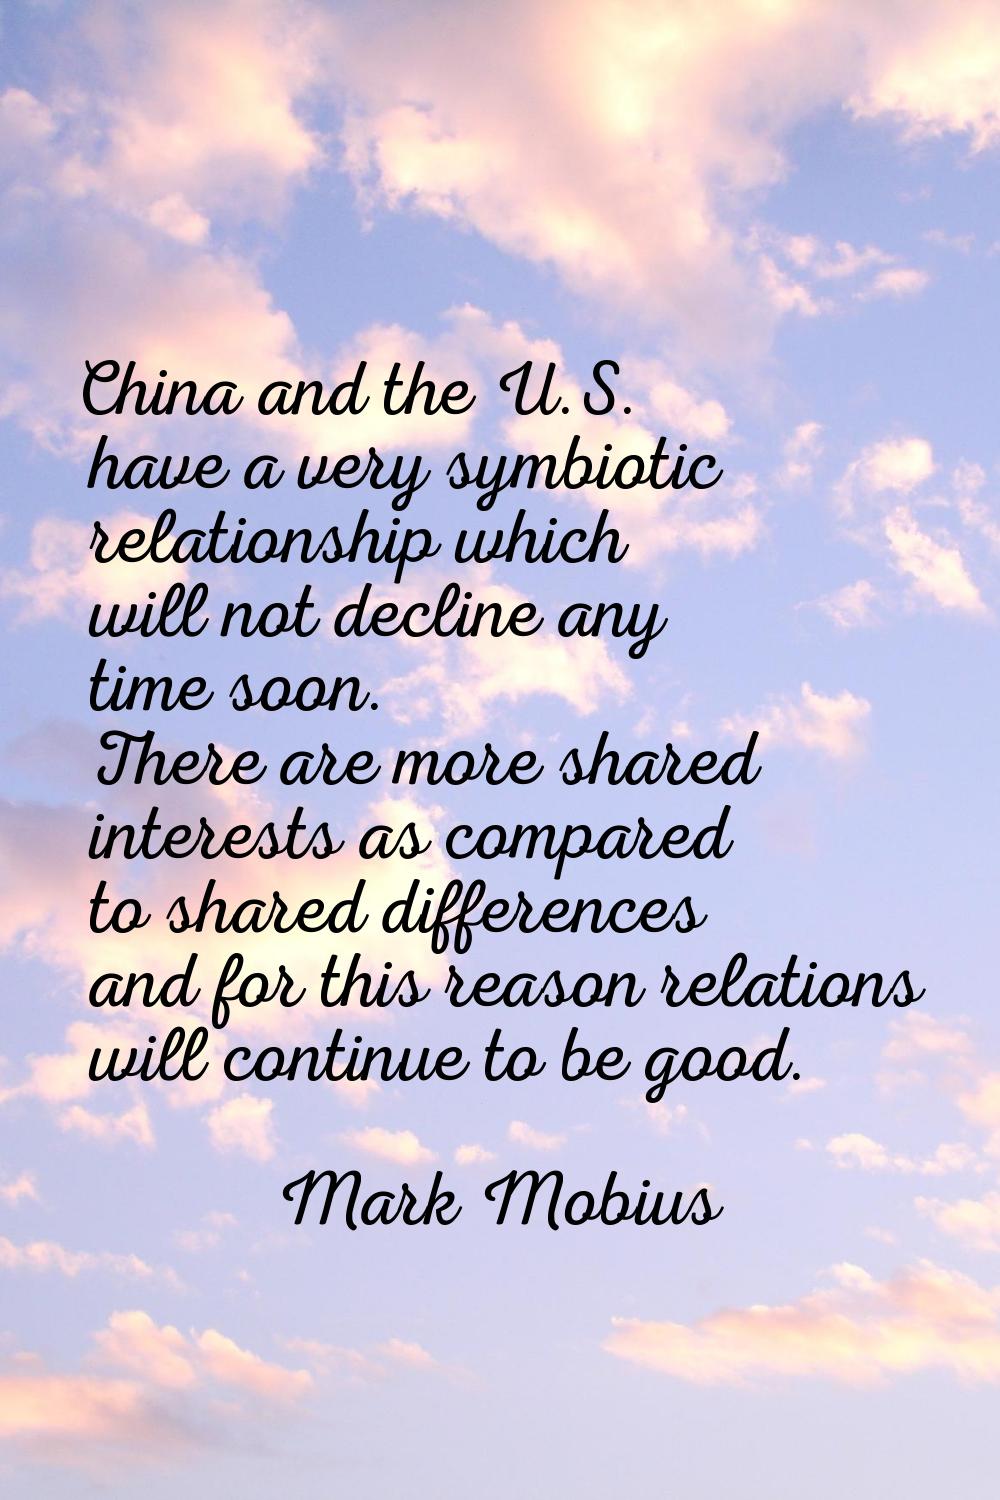 China and the U.S. have a very symbiotic relationship which will not decline any time soon. There a